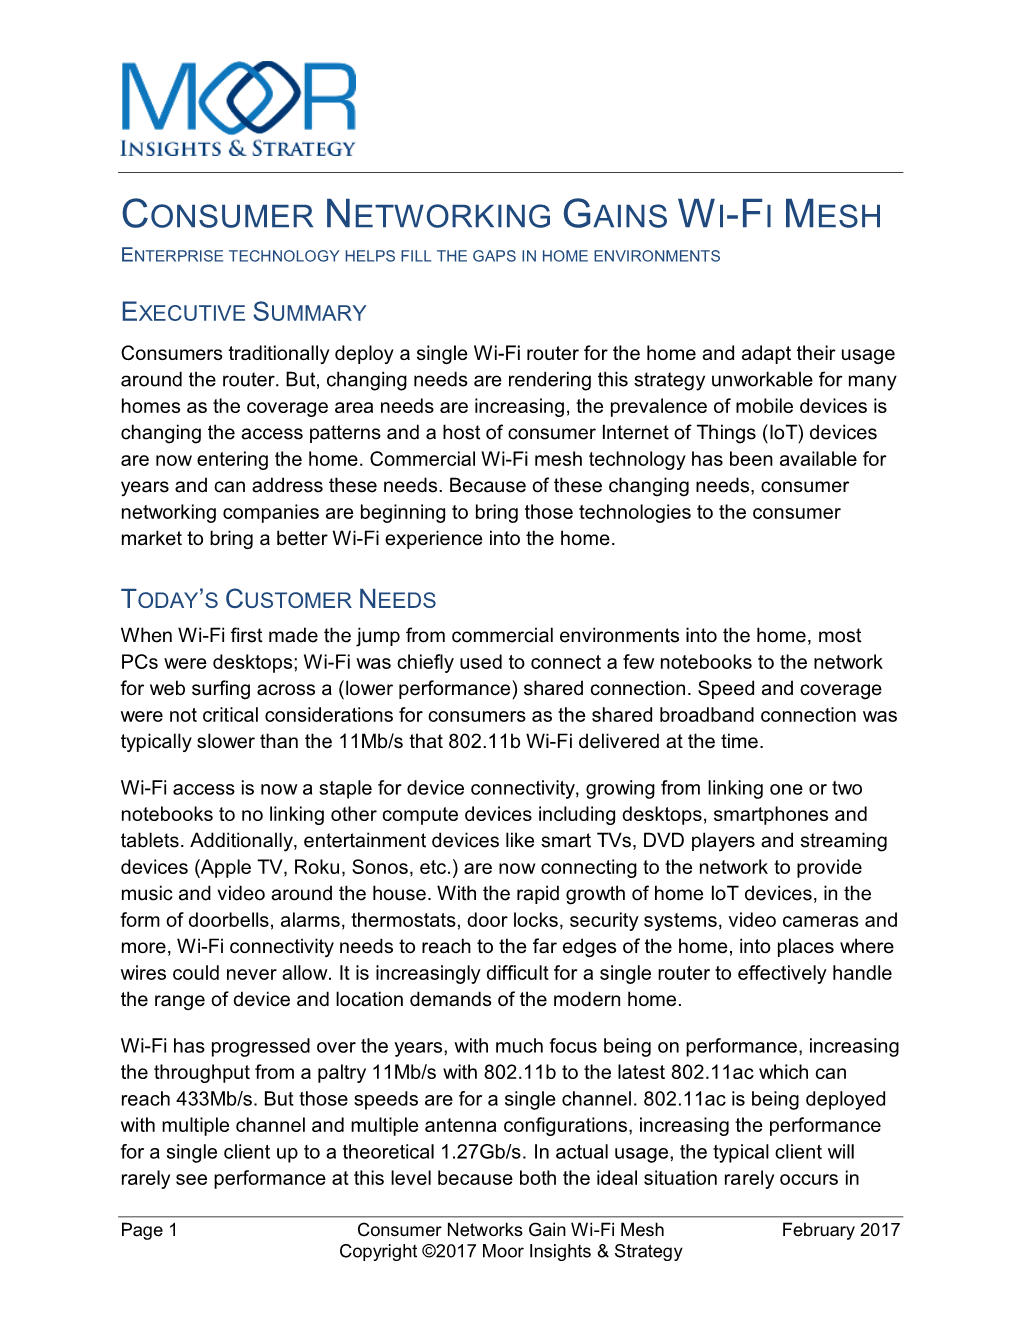 Consumer Networking Gains Wi-Fi Mesh Enterprise Technology Helps Fill the Gaps in Home Environments